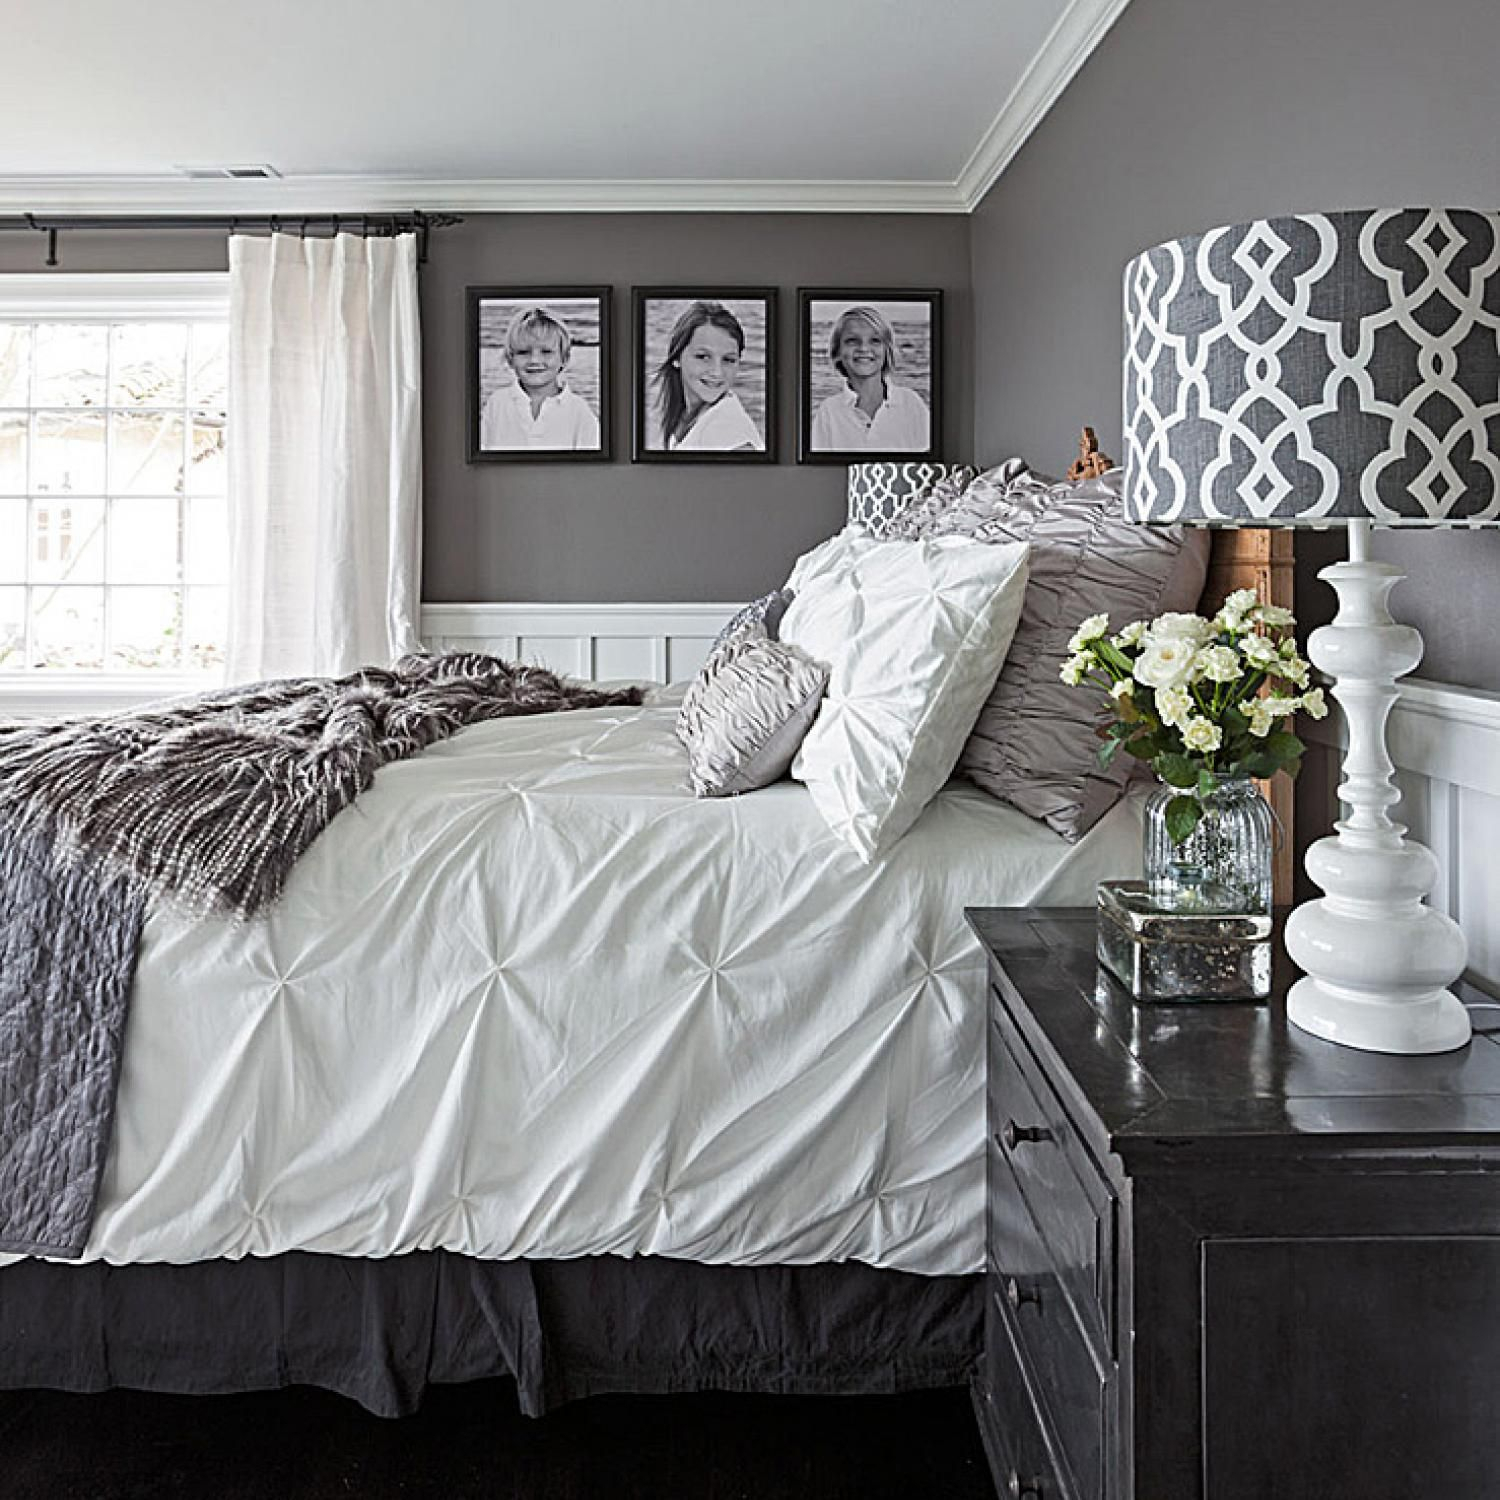 10 Nice White And Gray Bedroom Ideas gorgeous gray and white bedrooms bedrooms bedroom white bedroom 2024